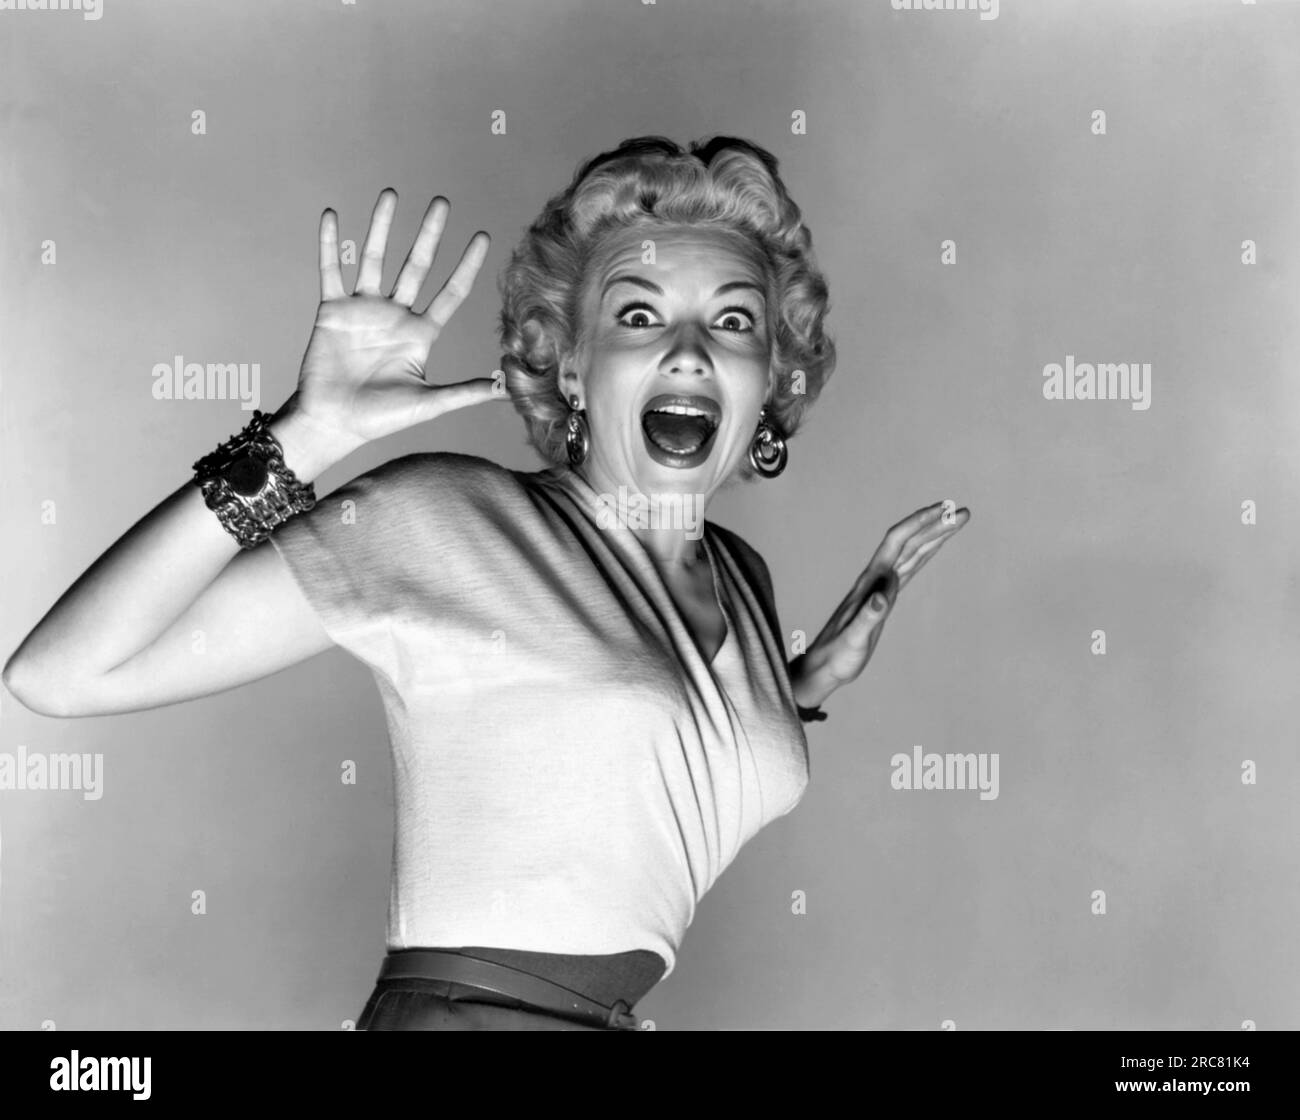 Hollywood, California:  1953.  Actress Kathleen Hughes reacts to the aliens in a promo still for the sc-fi thriller movie, 'It Came From Outer Space'. It was Universal Studio's first movie to be filmed in 3-D. Stock Photo